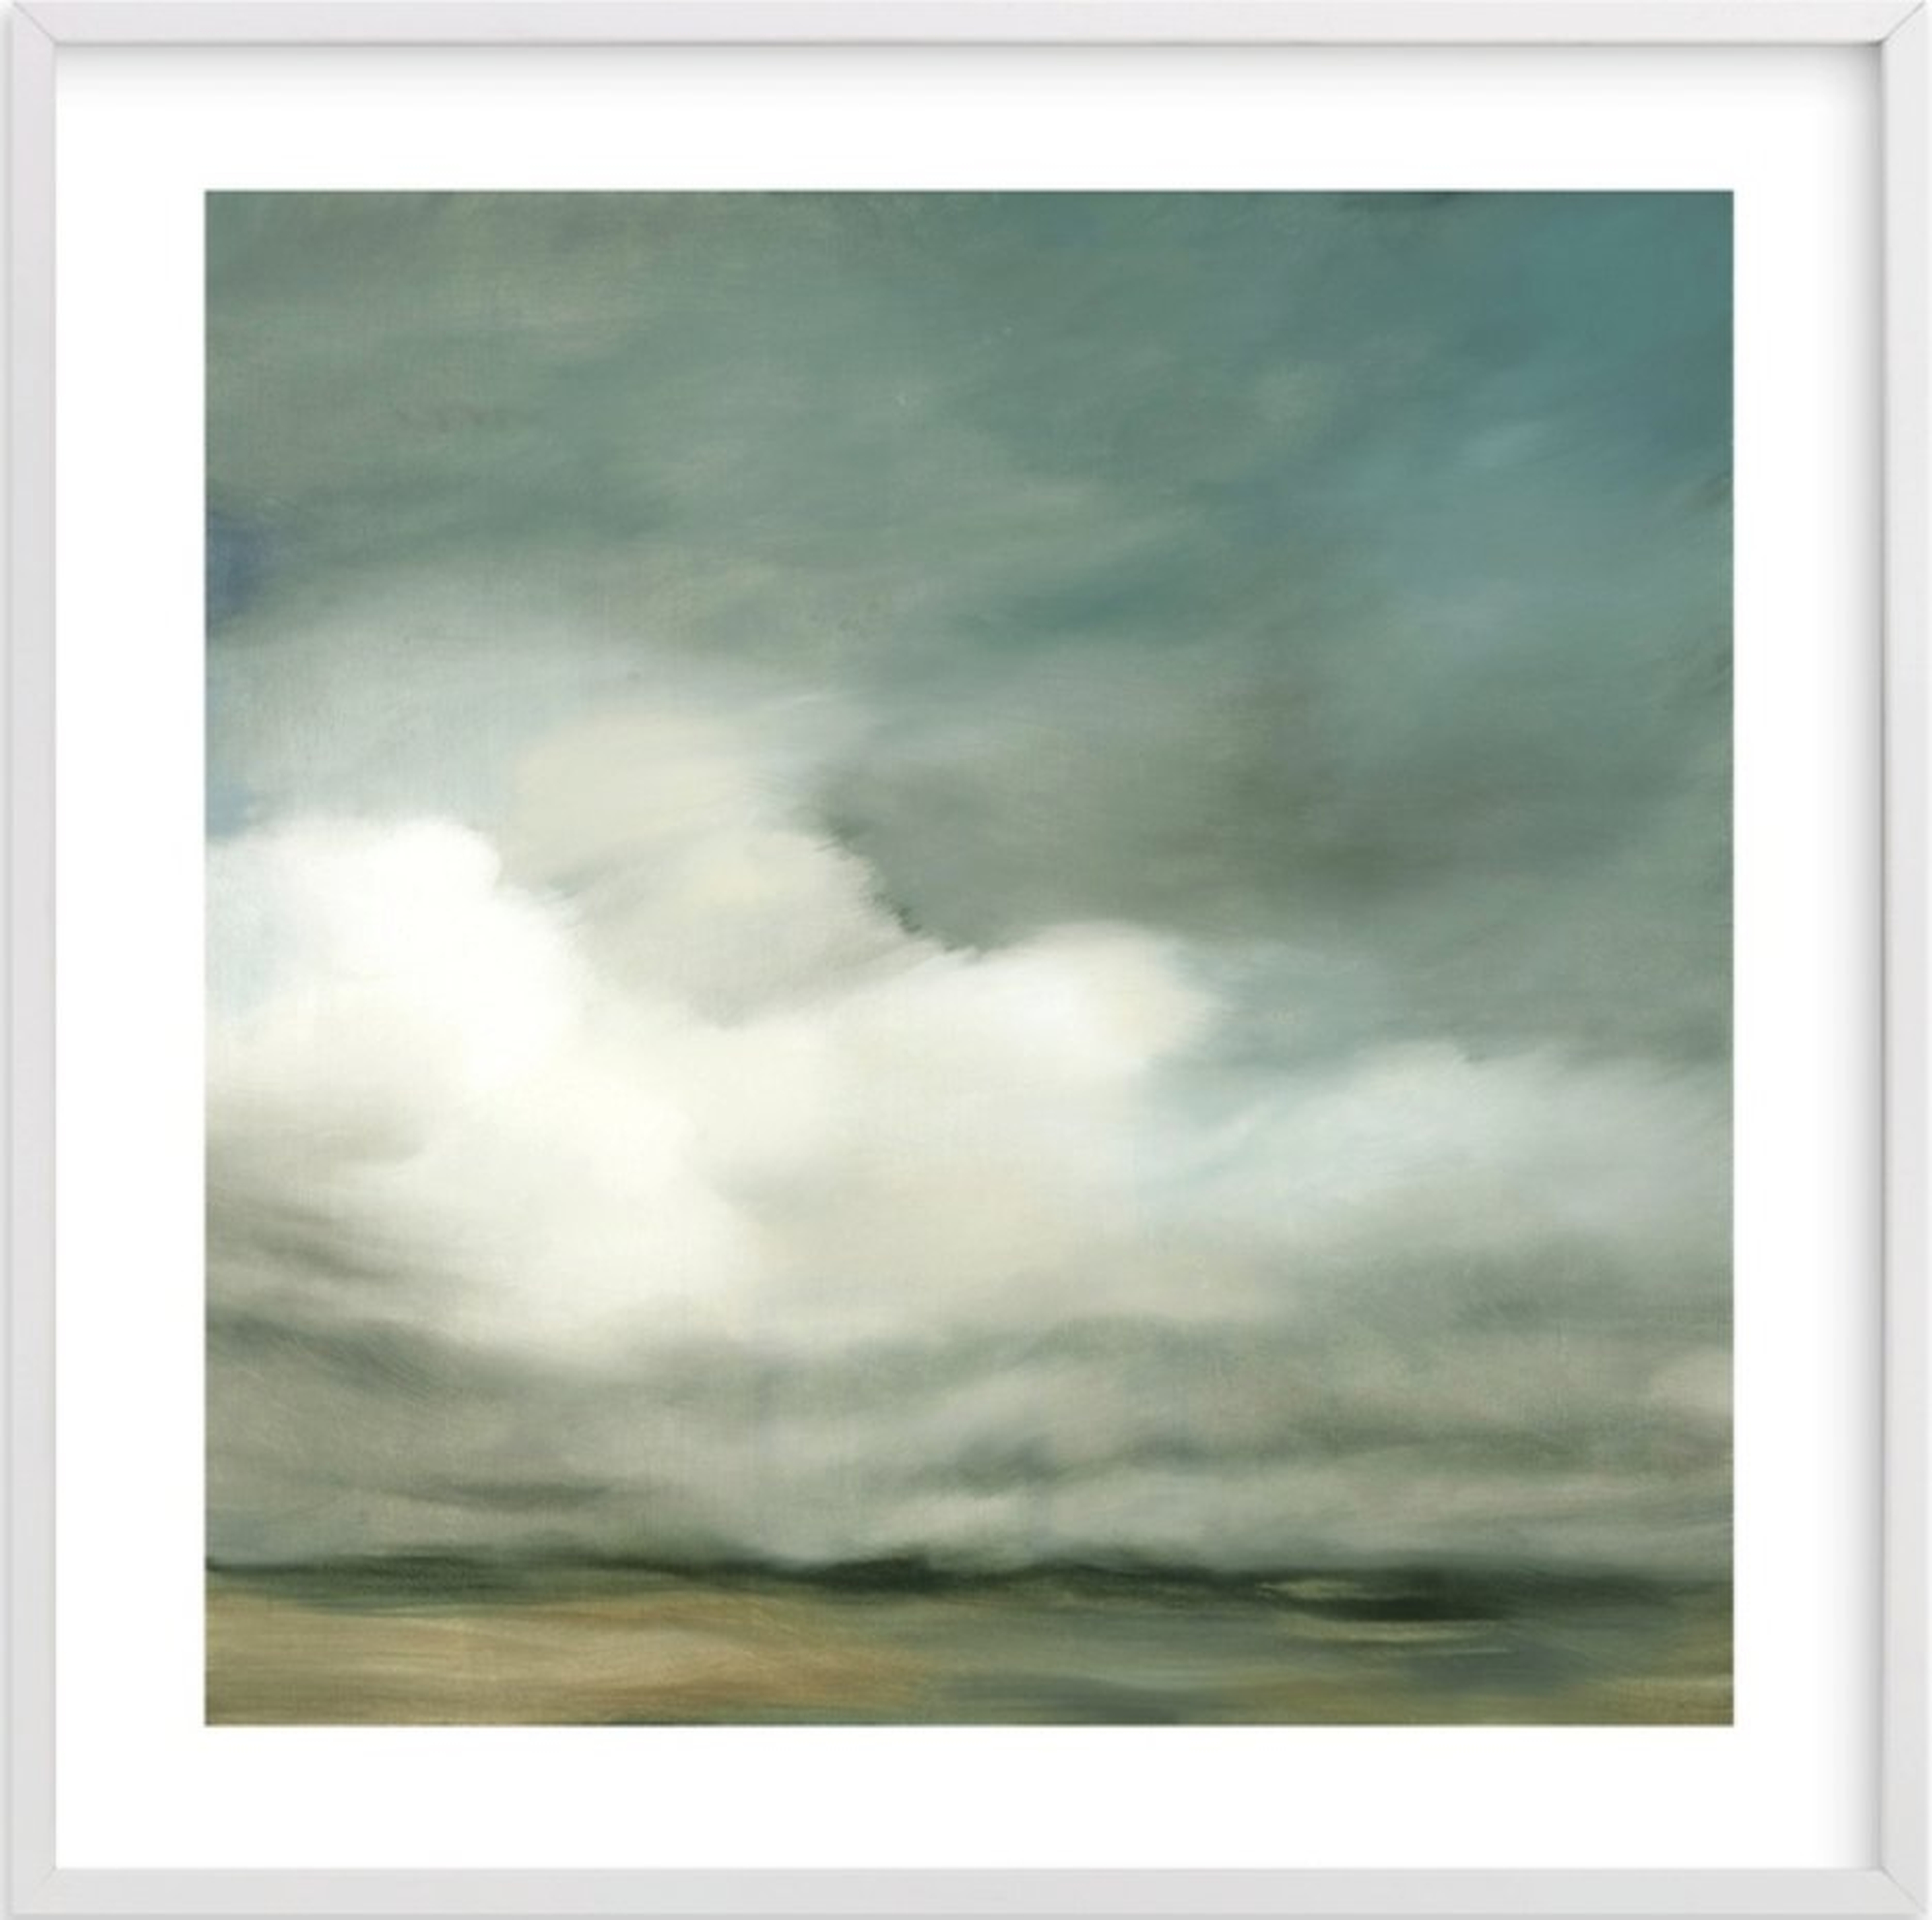 First of October, 30" x 30", White wood frame, white border - Minted